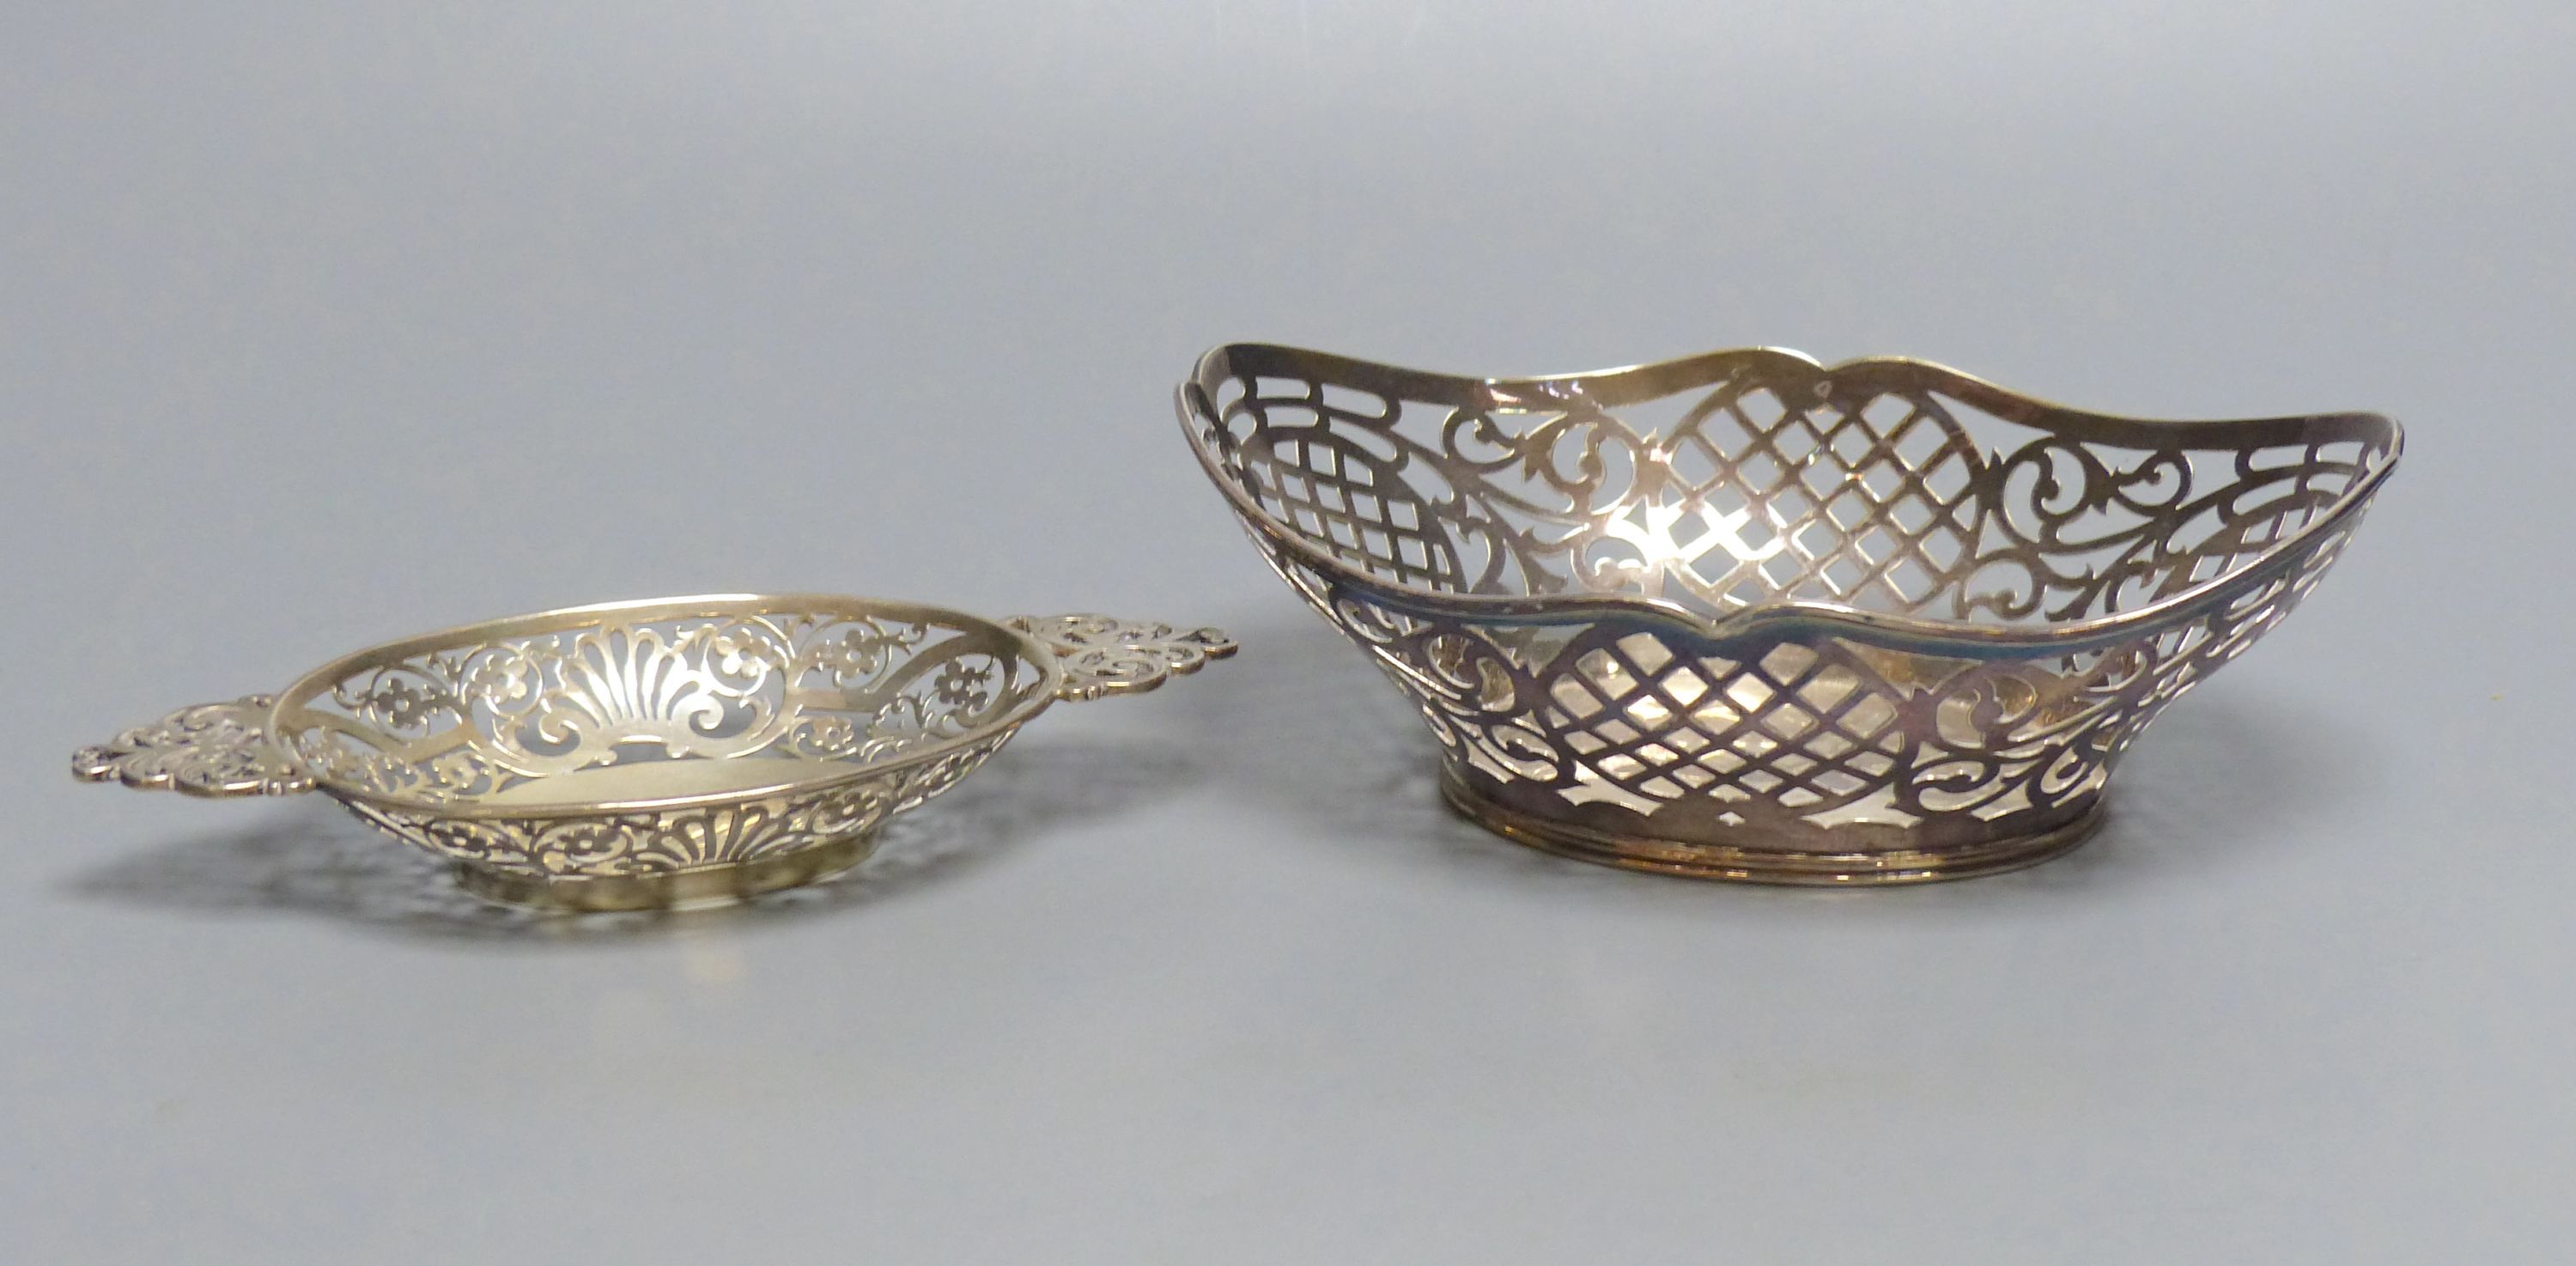 An Edwardian silver oval bon bon dish with pierced flower and scroll decoration and a Dutch white metal sweetmeat basket